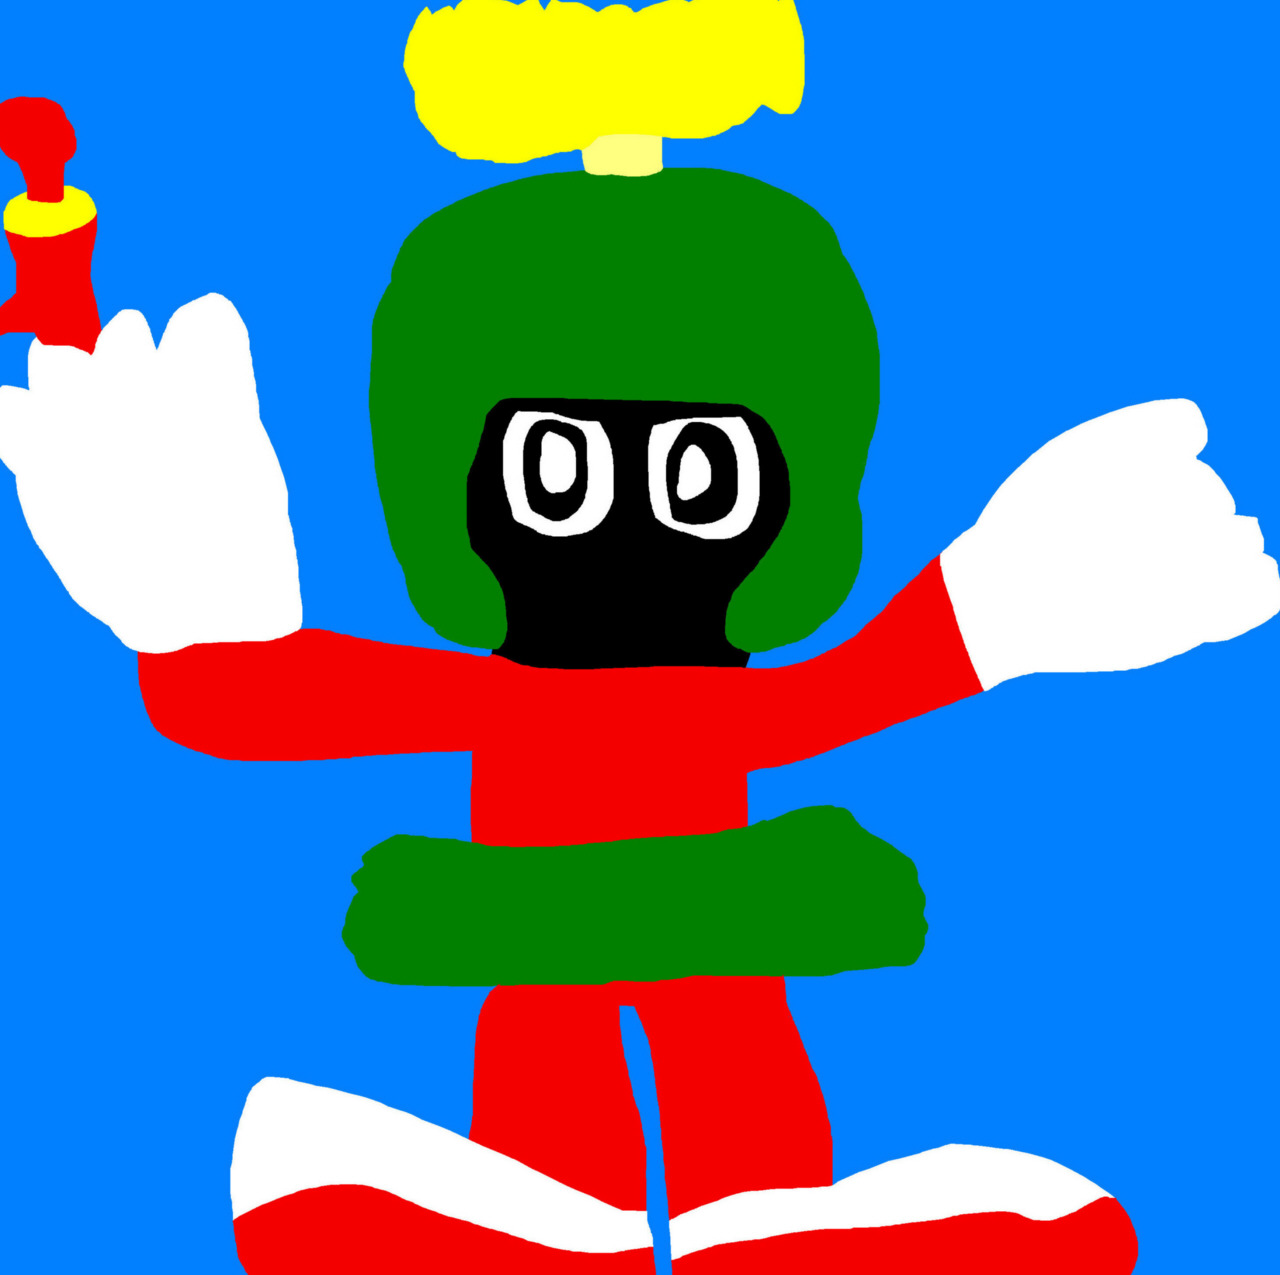 Marvin With A Blaster MS Paint by Falconlobo